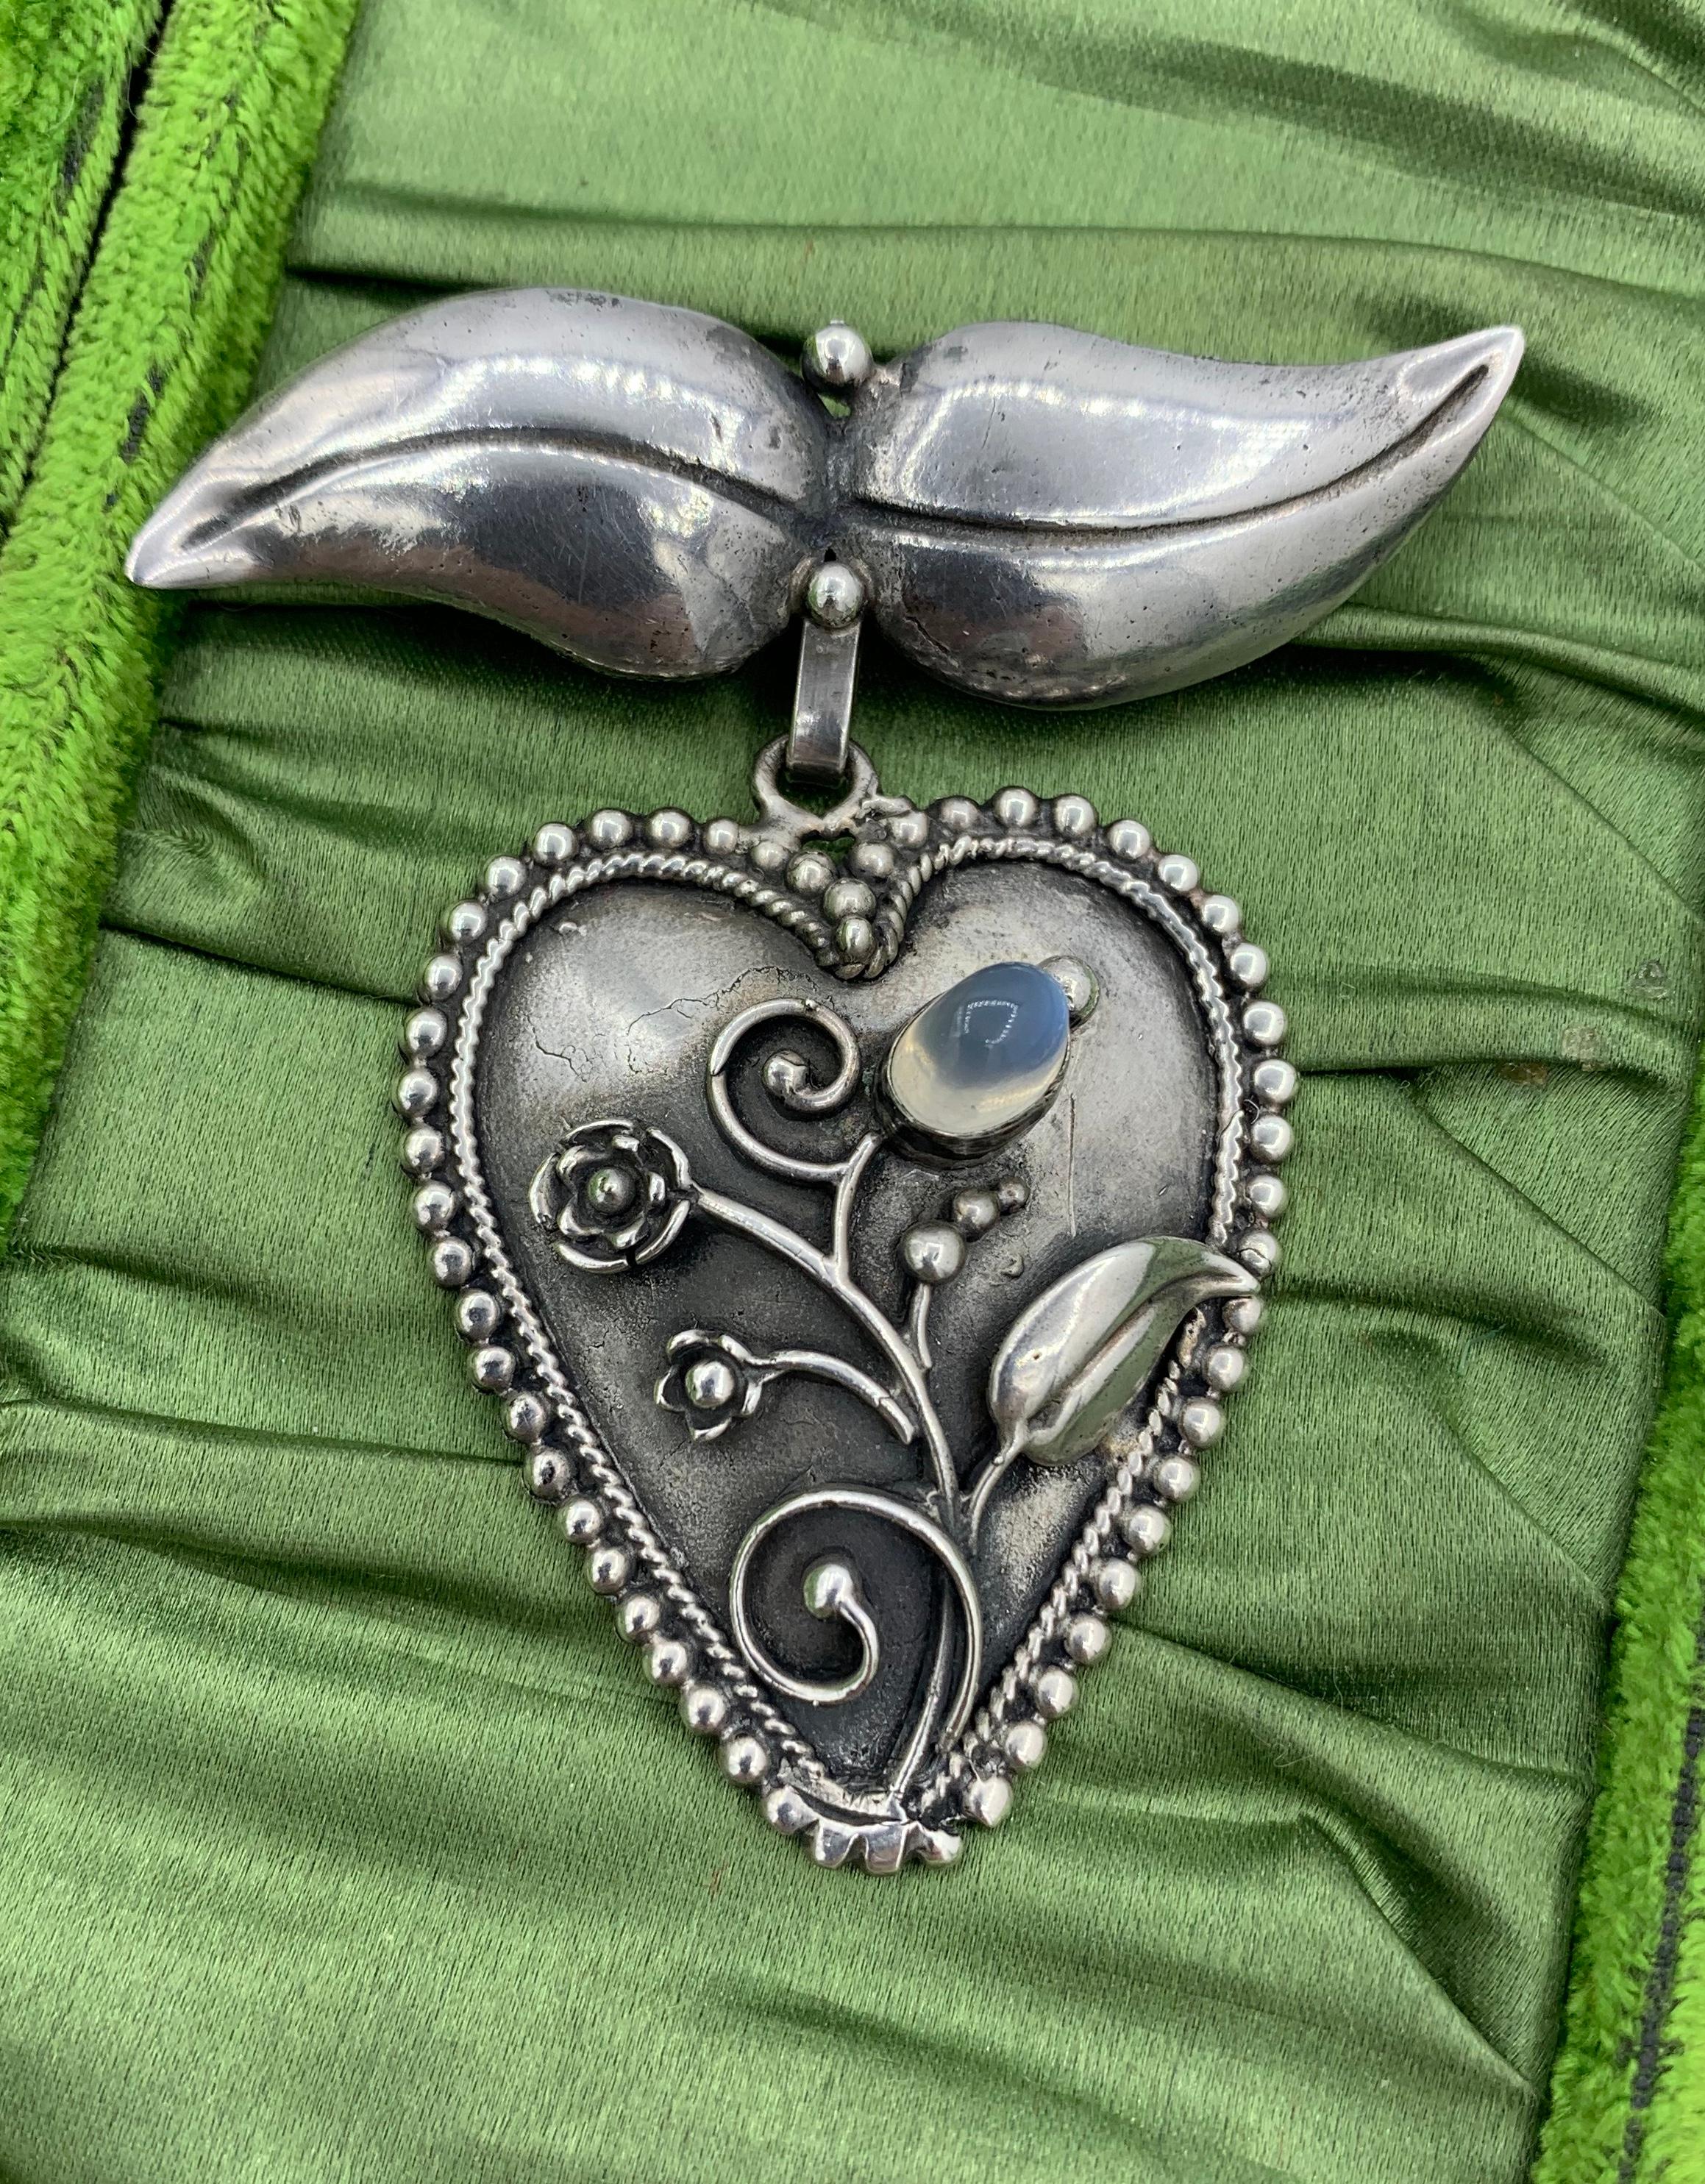 This is a stunning heart shaped brooch pendant pin with an applied design in Sterling Silver of a flower and leaf motif with a moonstone cabochon.  The heart has a lovely beaded border.  The heart can be removed from the leaf form top portion.  The